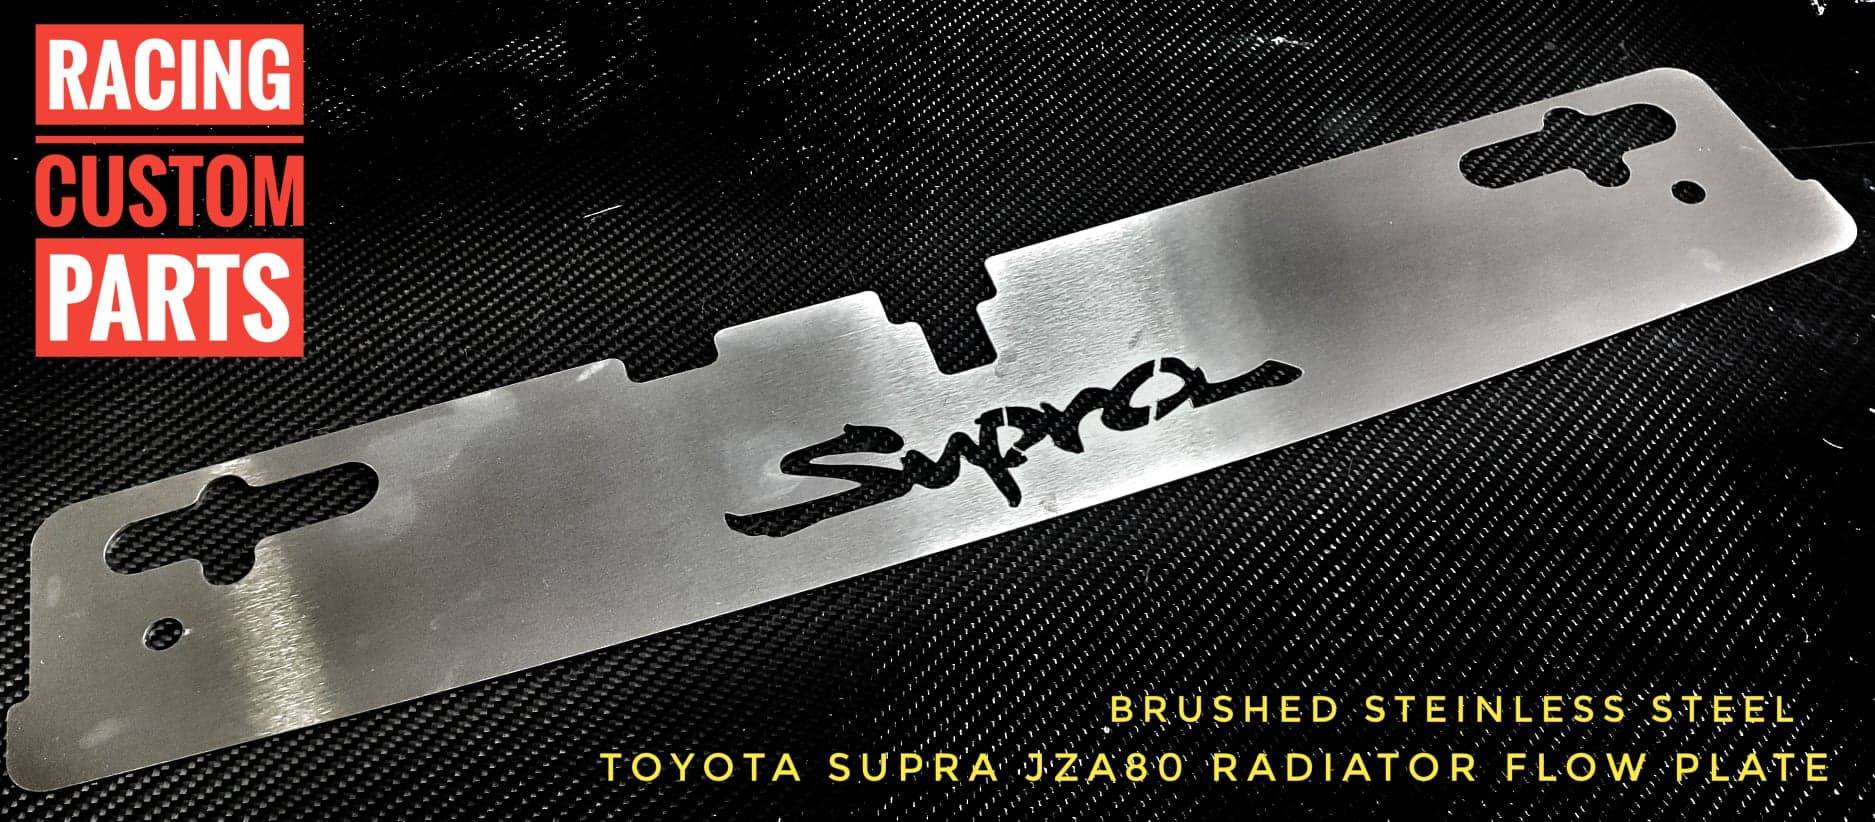 Toyota Supra JZA80 radiator flow plate brushed steinless steel with 